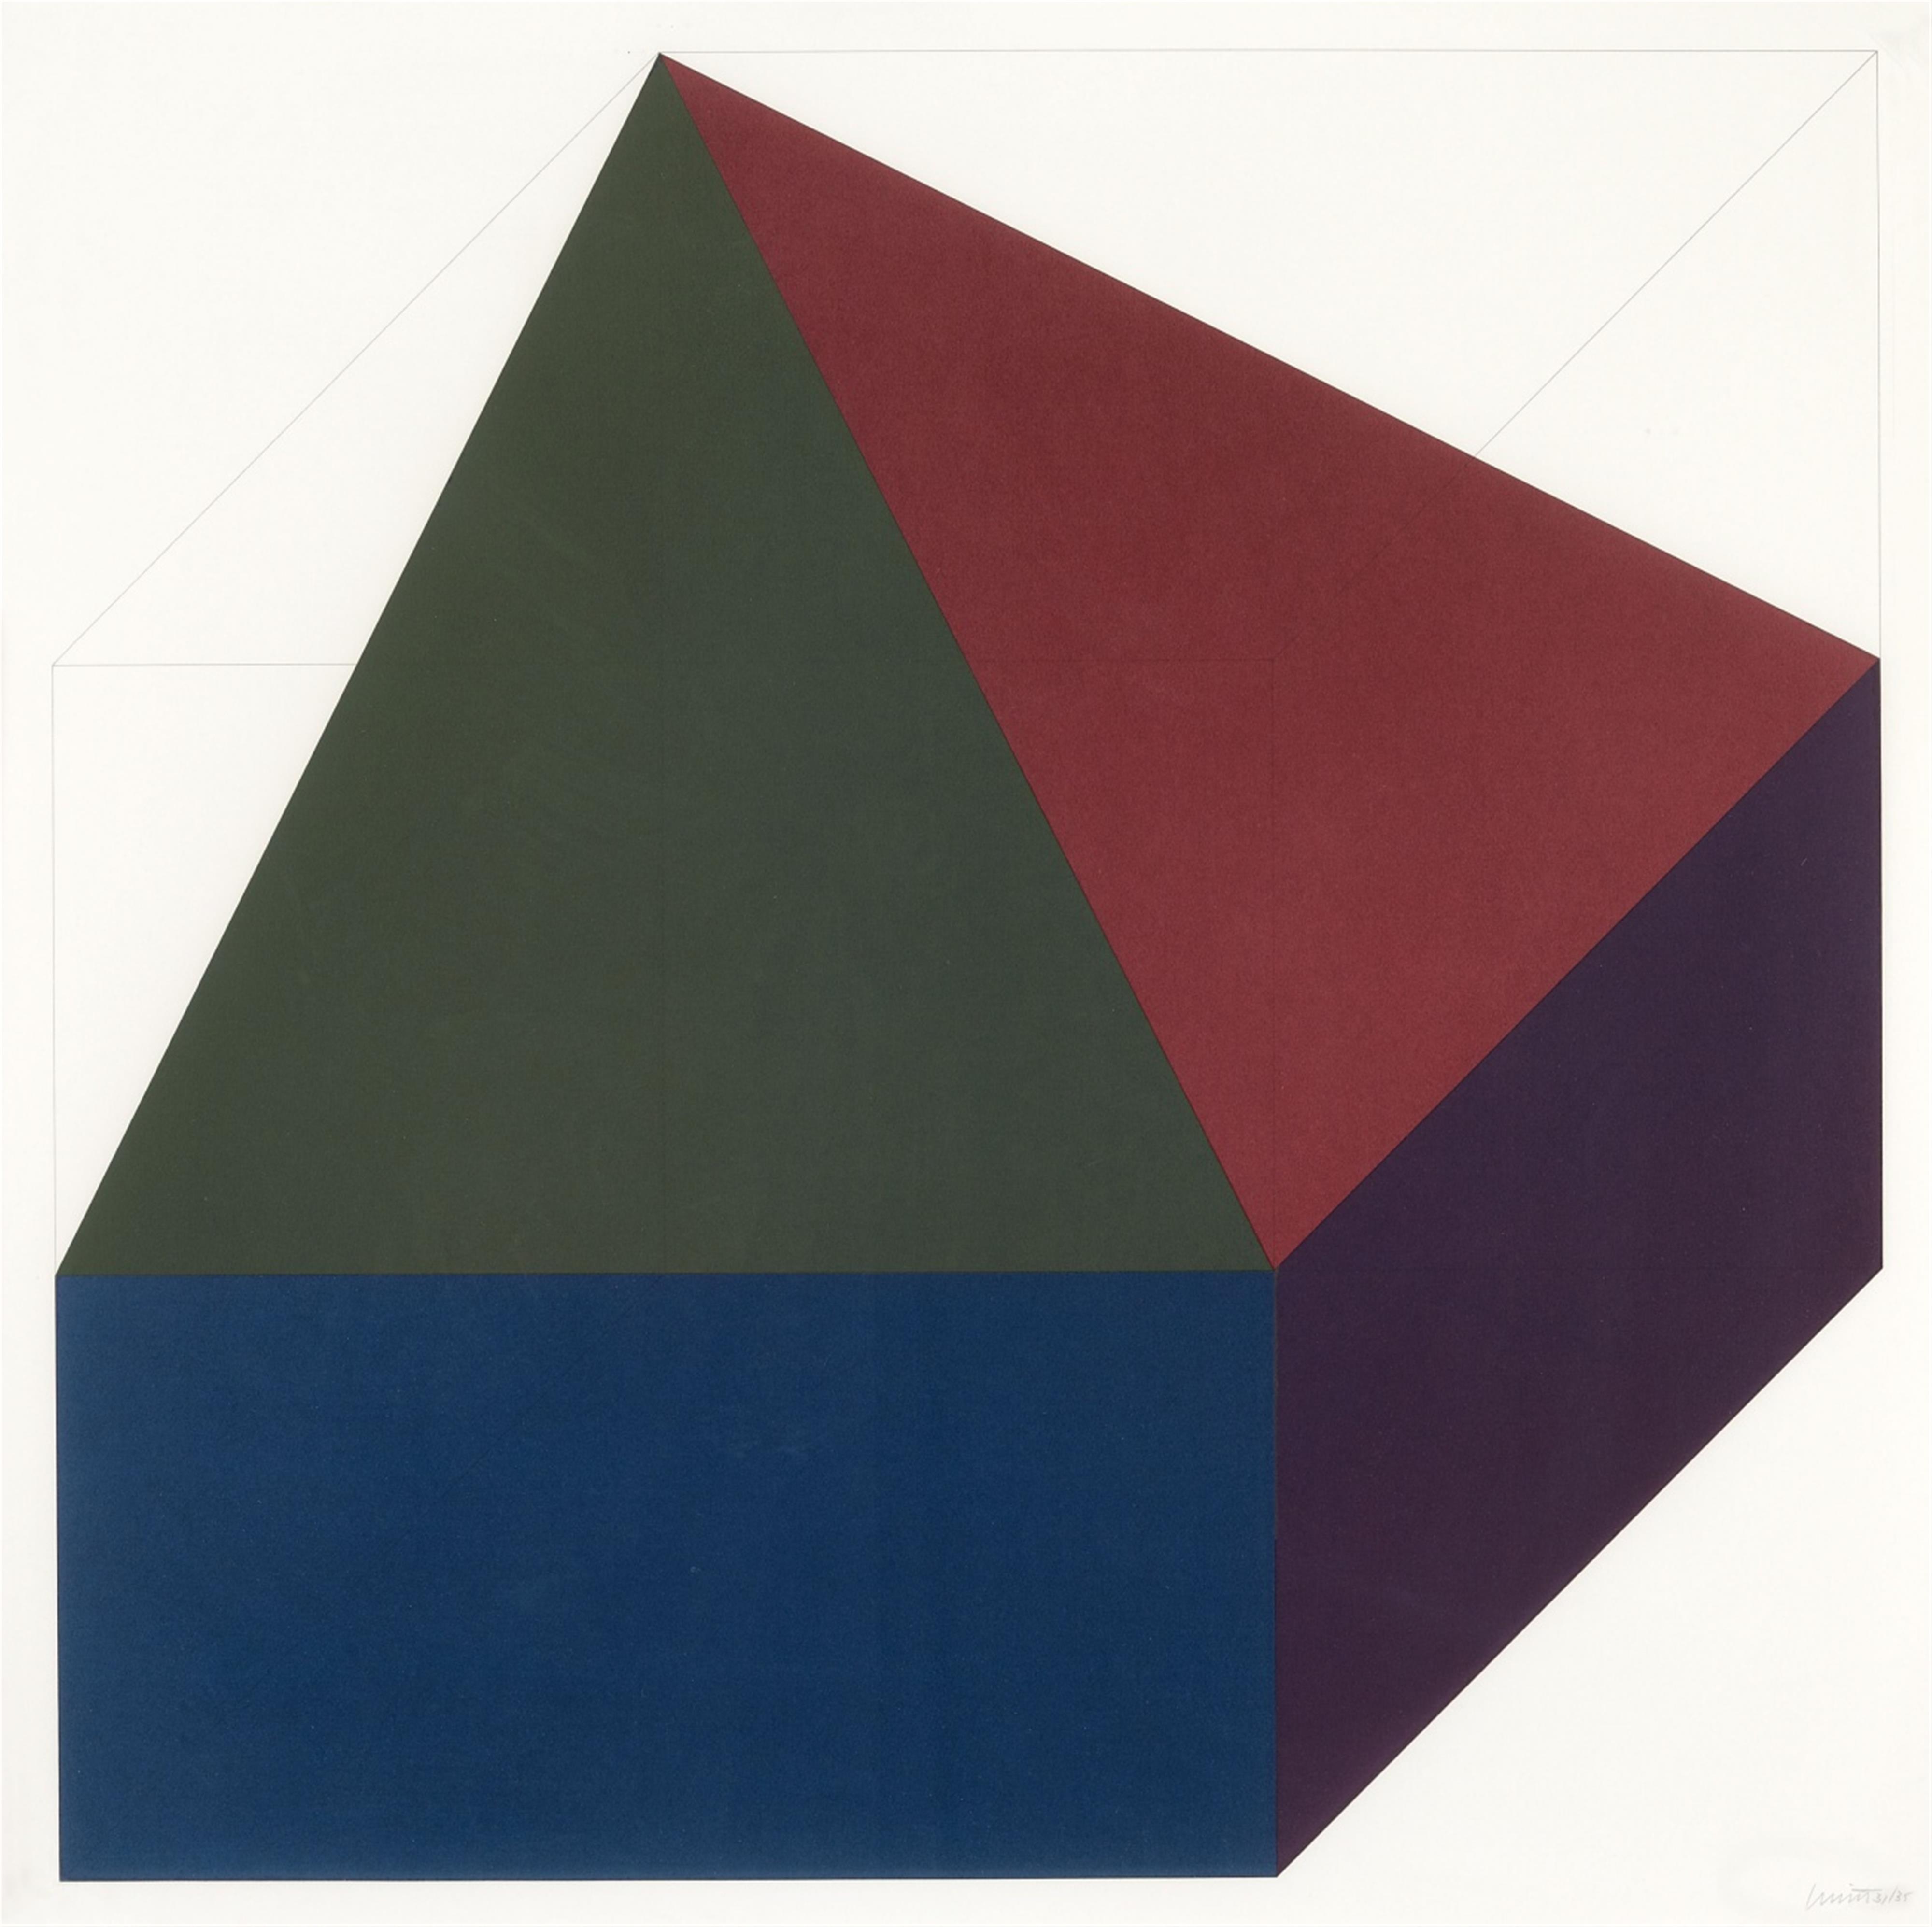 Sol LeWitt - Forms Derived from a Cube (Colors Superimposed) - image-2